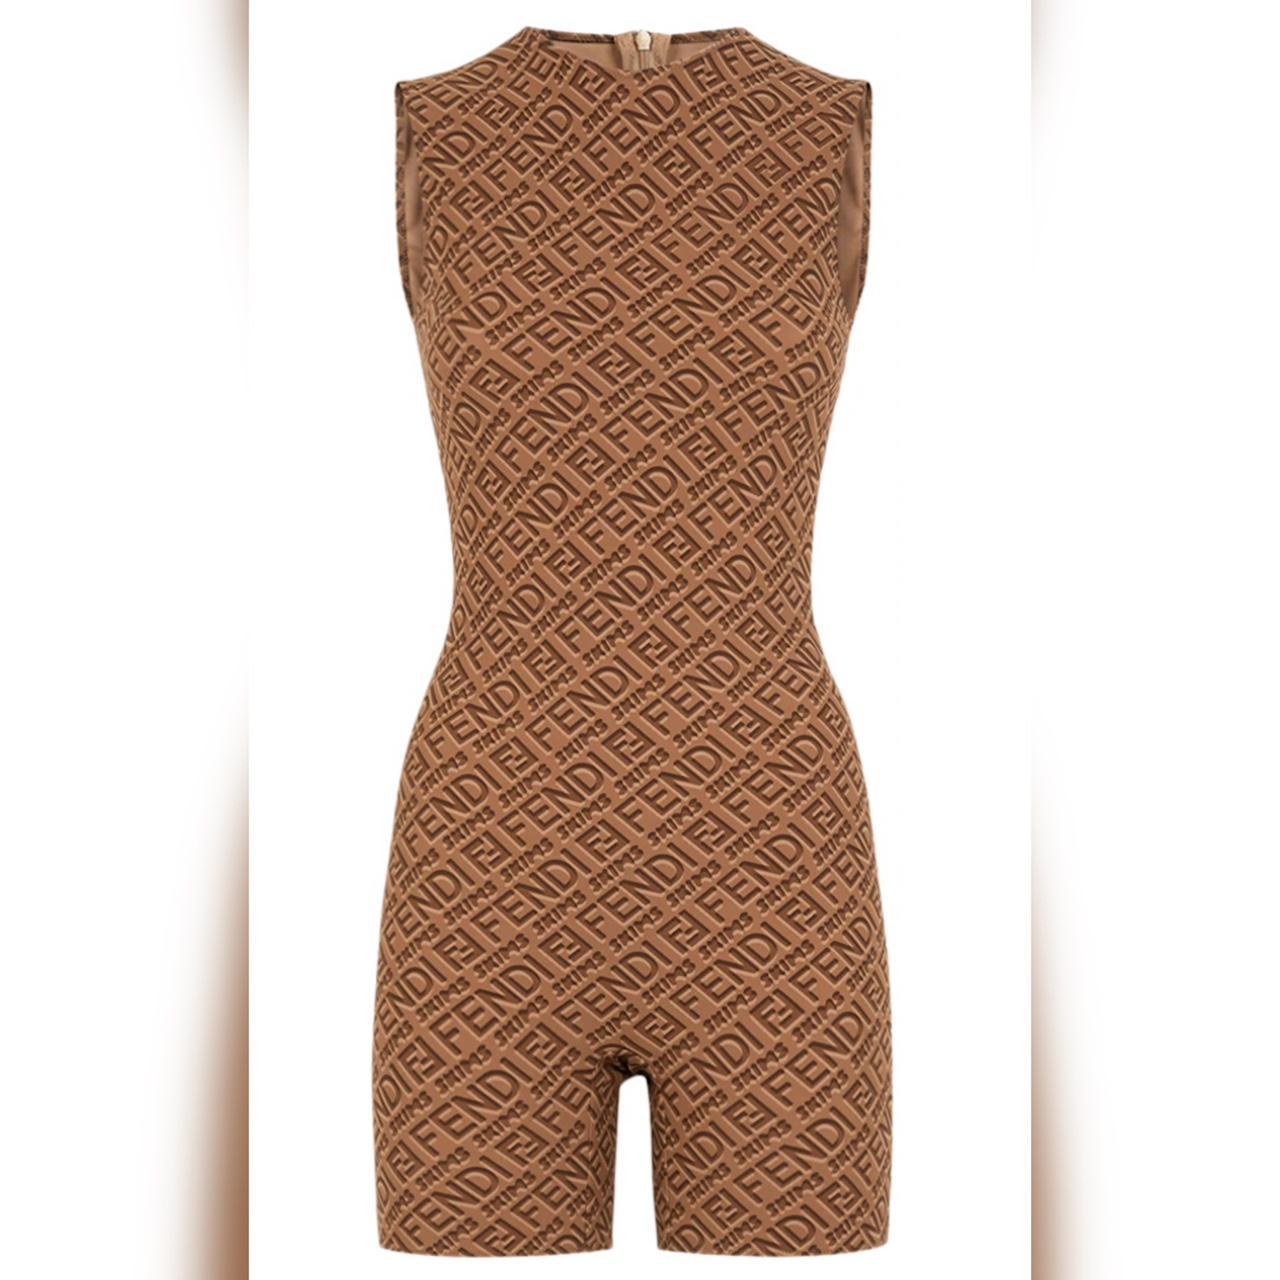 Fendi x Skims Printed Crew Neck Romper - Neutrals, 11.5 Rise Jumpsuits and  Rompers, Clothing - FENSK21097